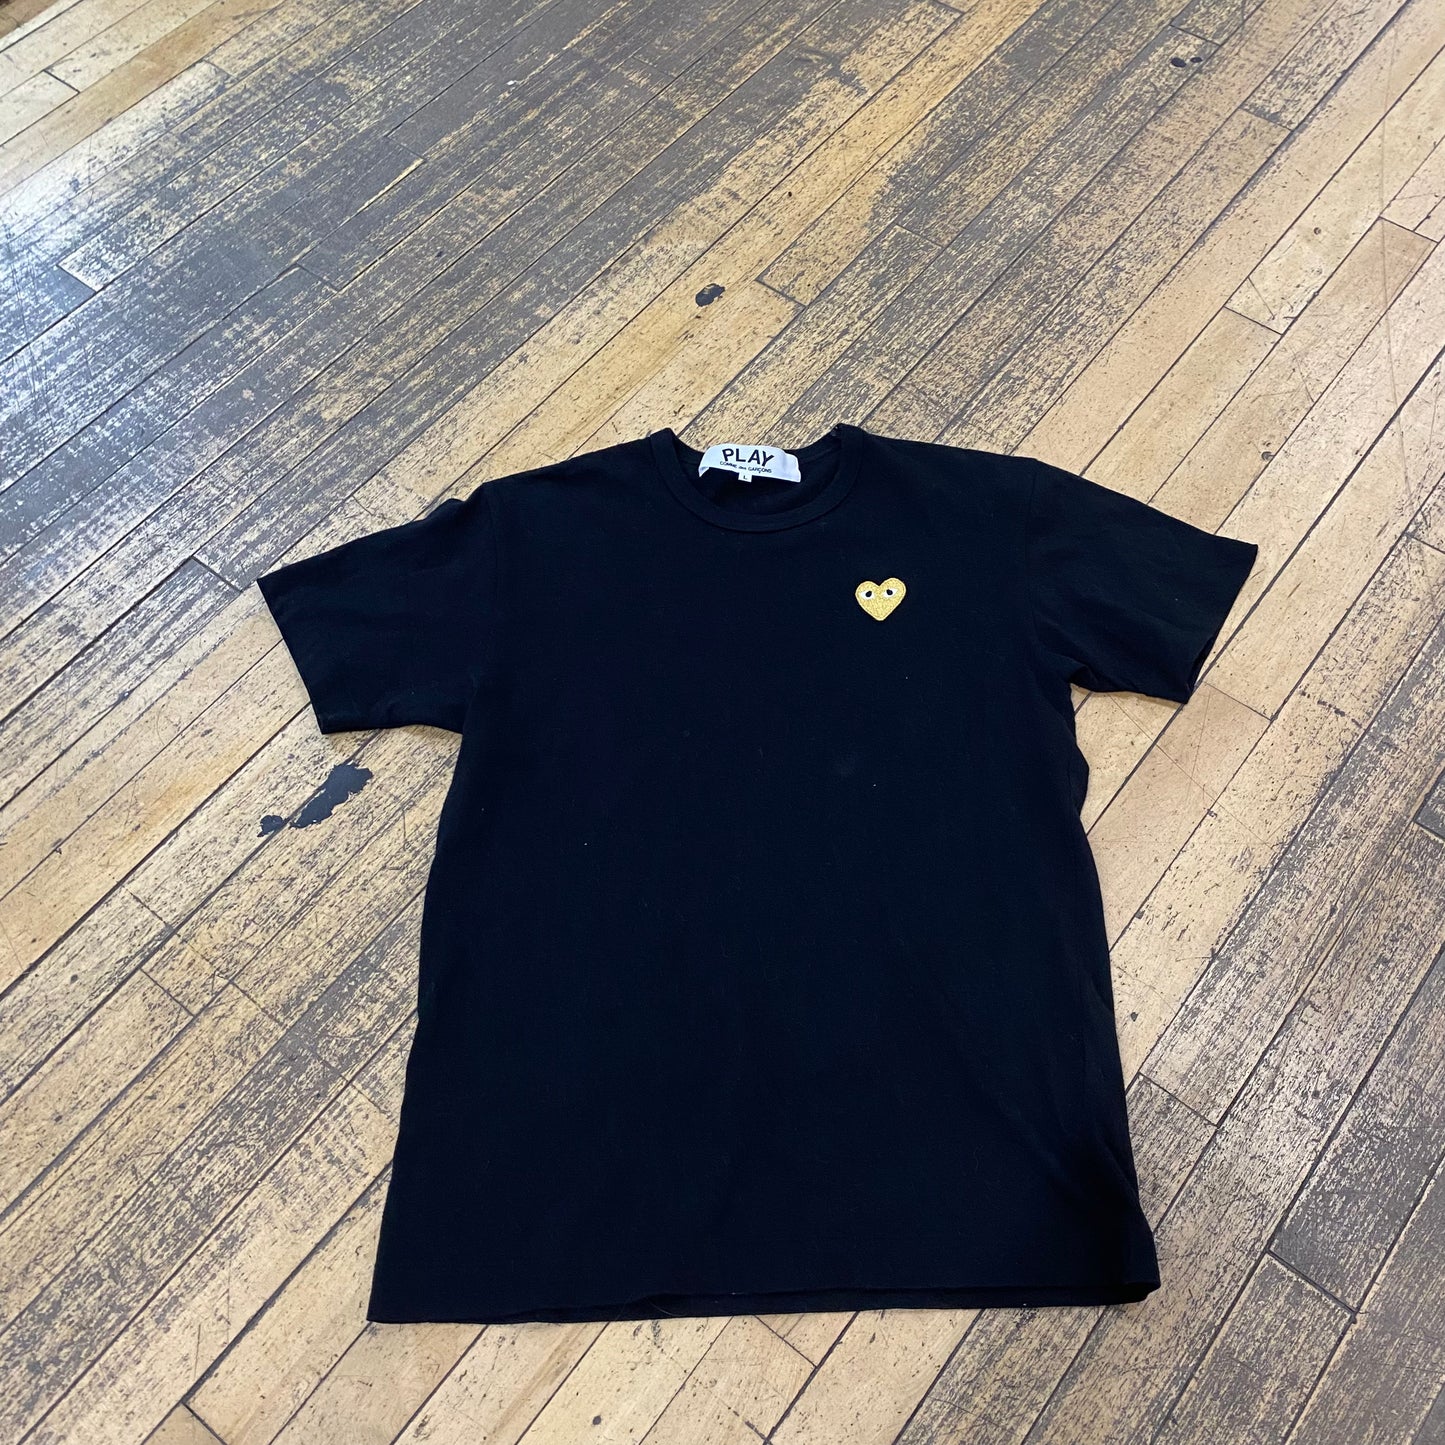 CDG Play Black/Gold Shirt Size Large (MKE) TRUSTED CLUB